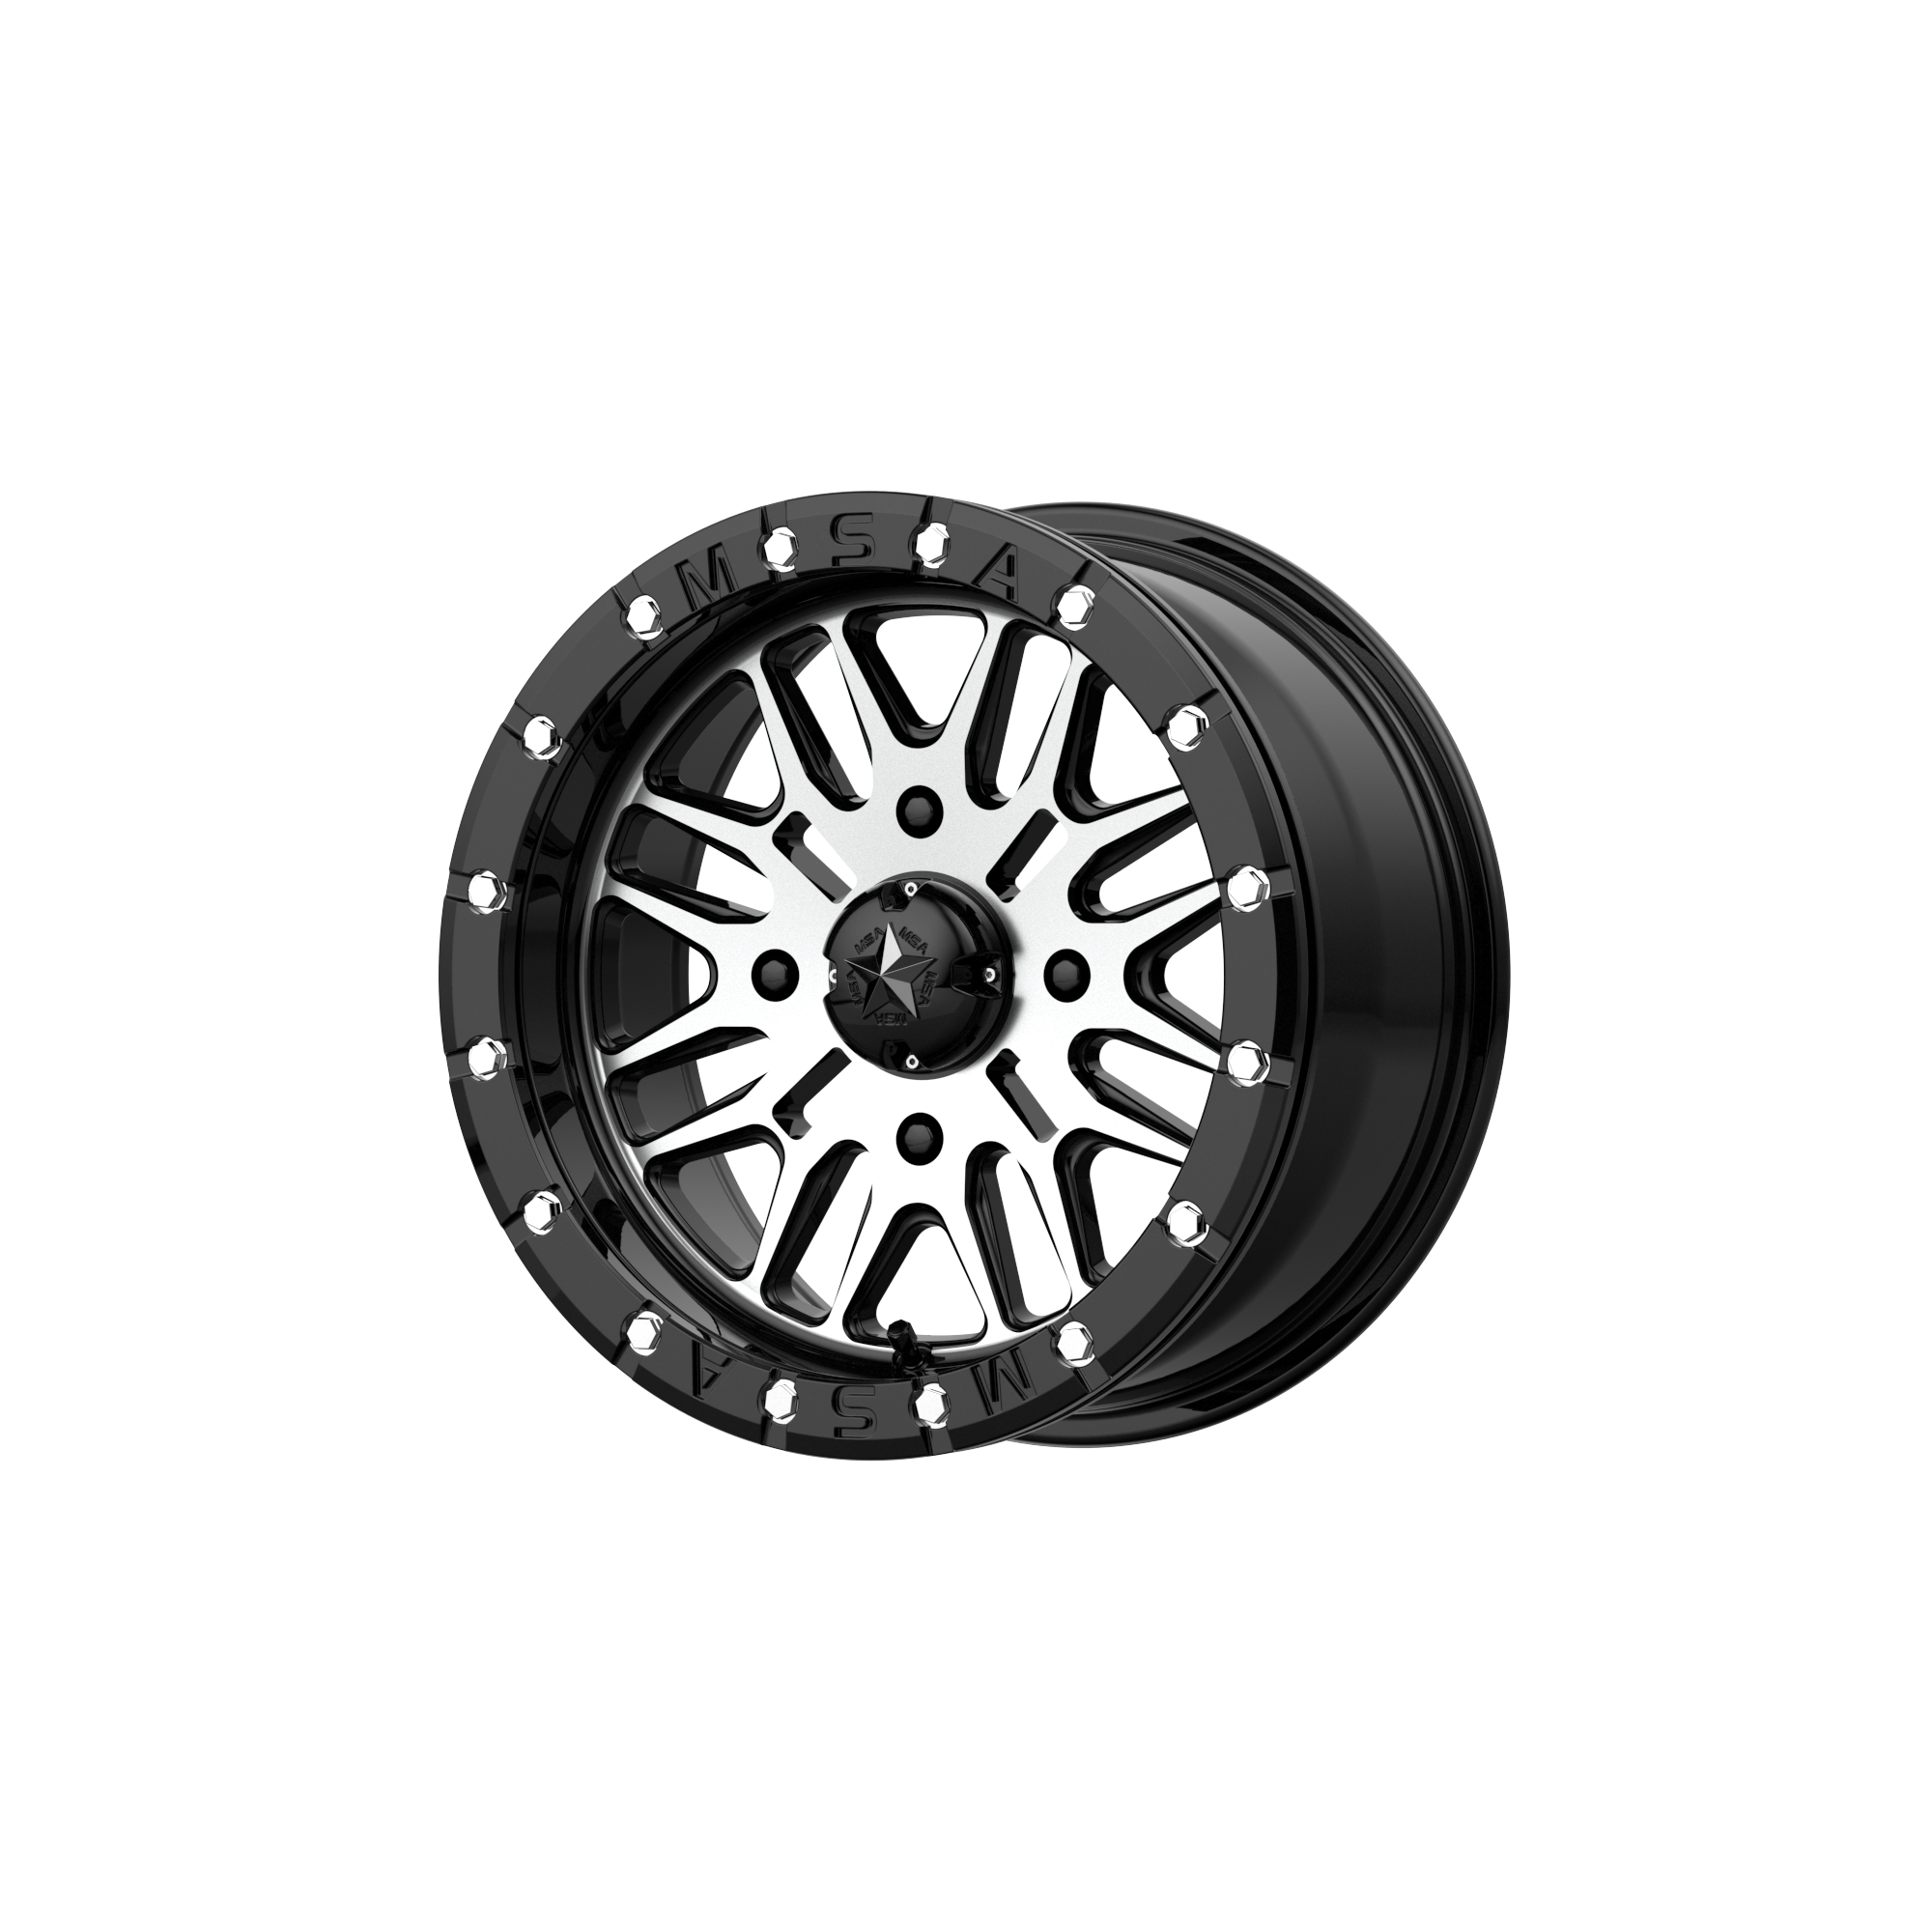 BRUTE BEADLOCK 16x7 4x137.00 GLOSS BLACK MACHINED (10 mm) - Tires and Engine Performance